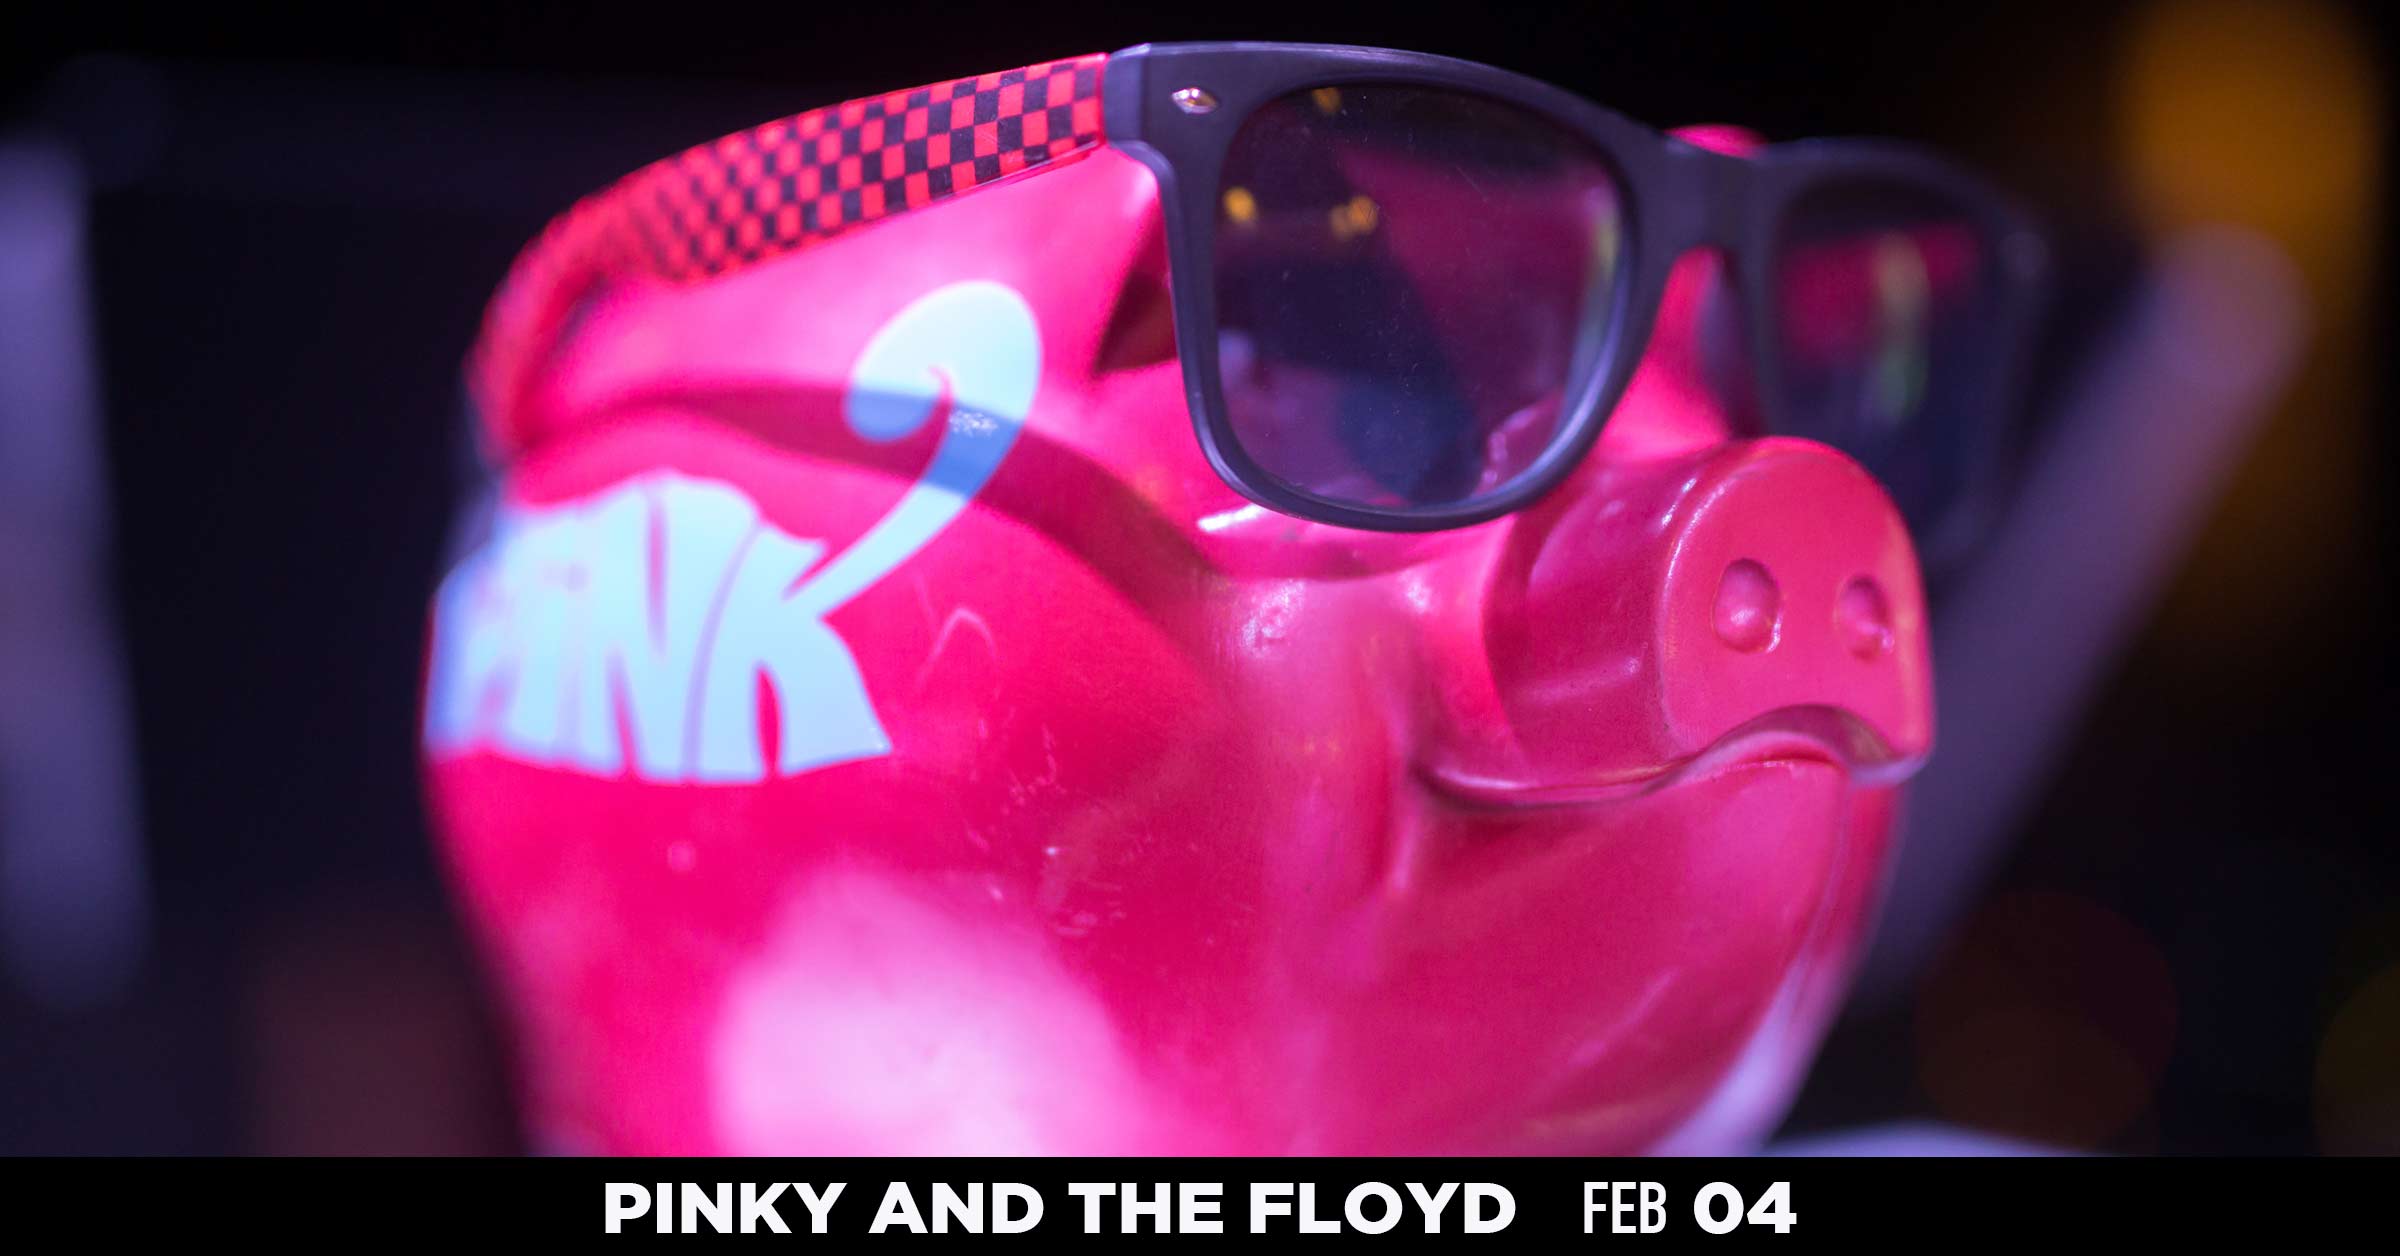 Pinky and The Floyd - Feb 04